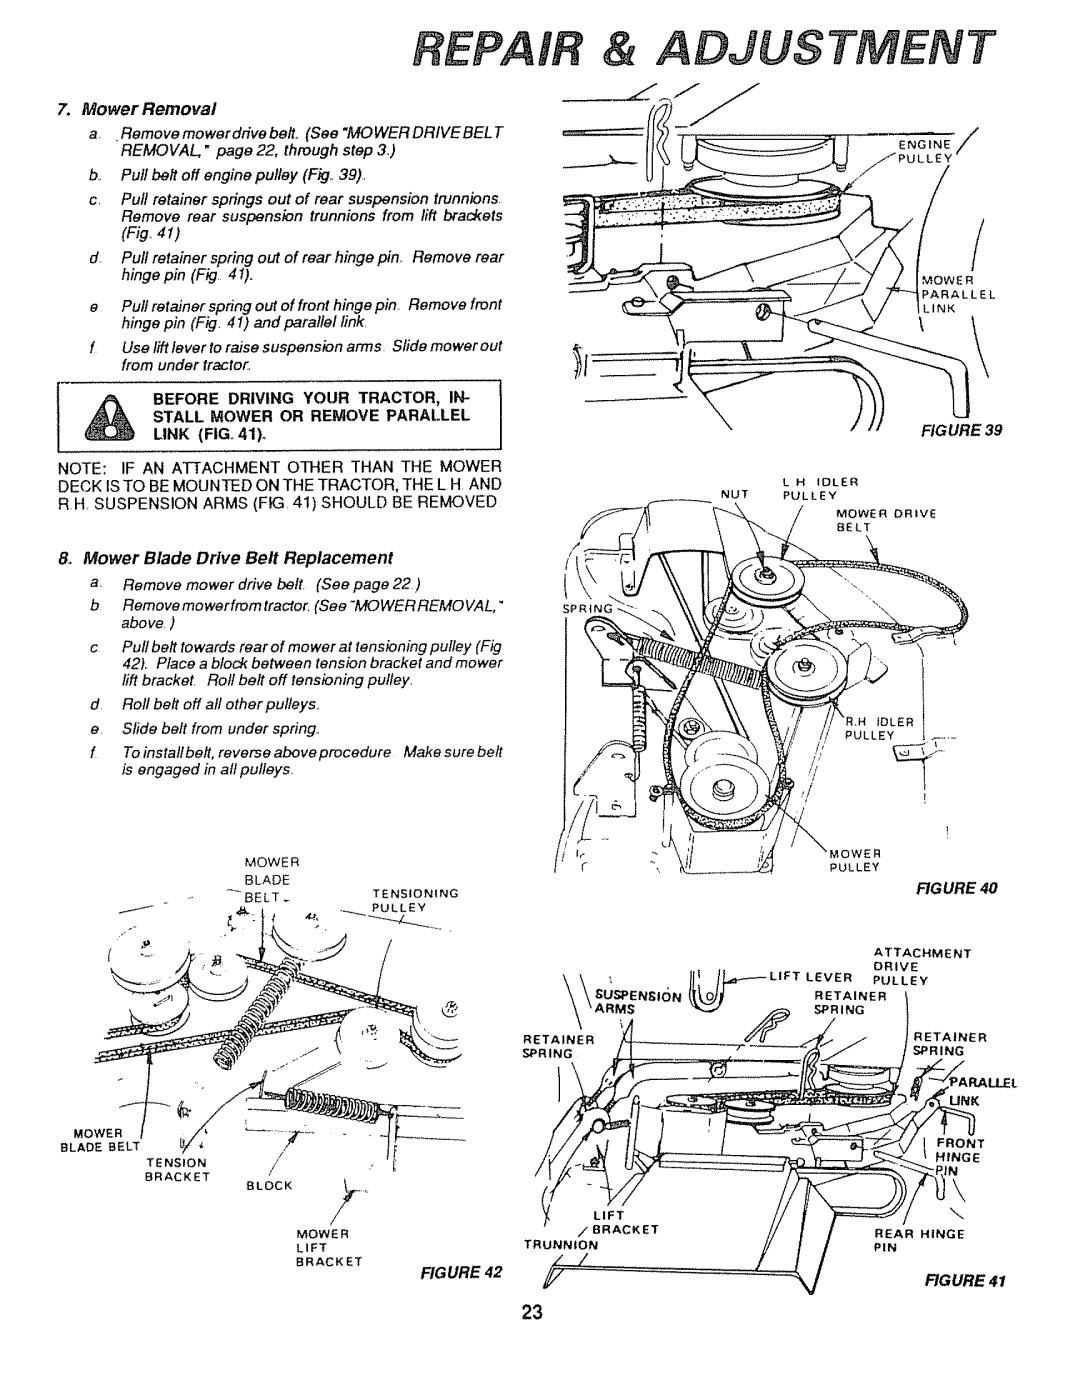 Sears 917.25446, 917.25004 owner manual Mower Removal, Mower Blade Drive Belt Replacement 